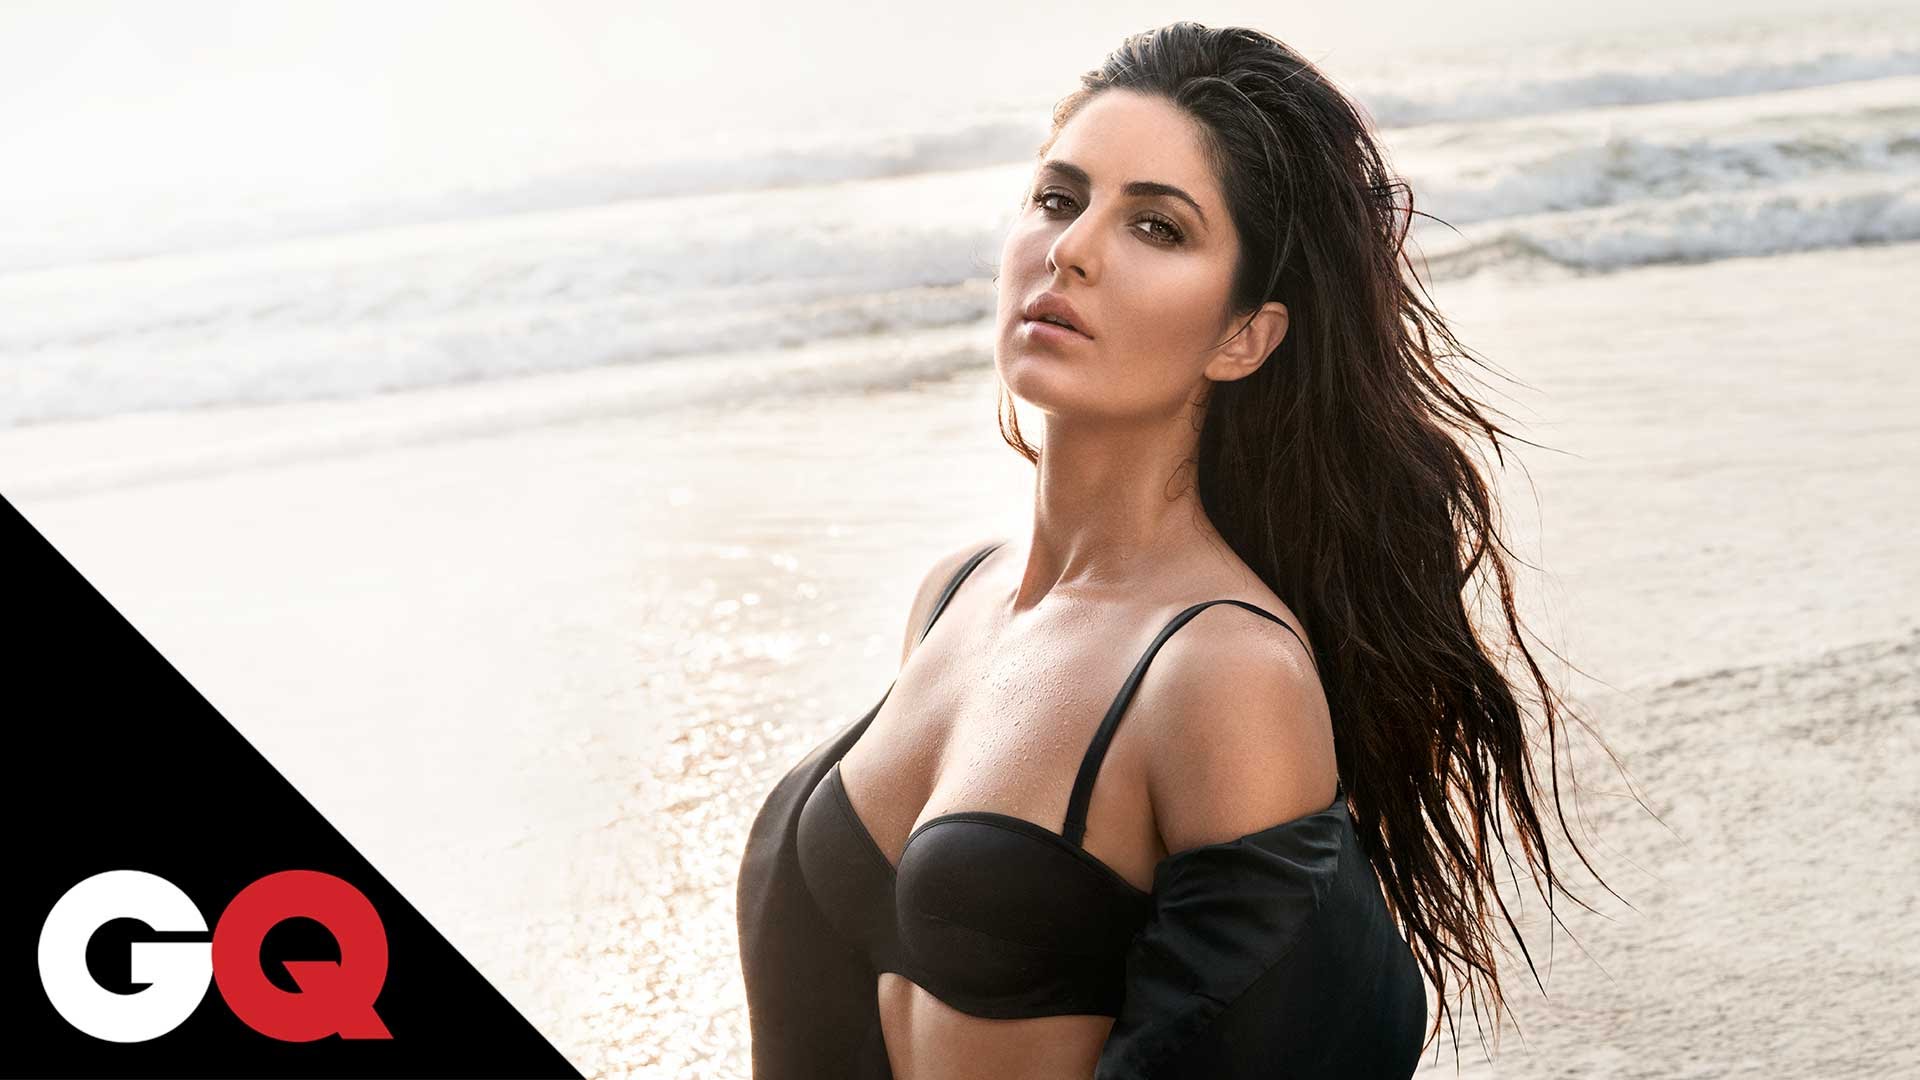 Katrina Kaif: The Hottest Woman in Bollywood | Exclusive Photoshoot ...